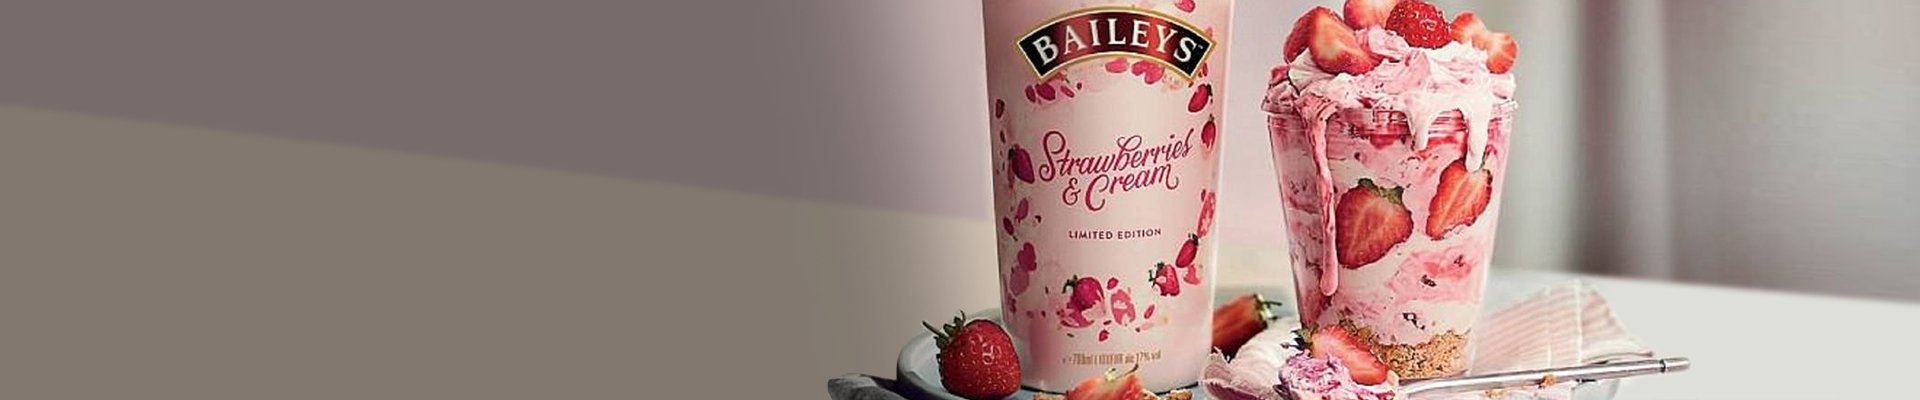 Baileys-strawberries-and-cream-hits-the-uk The Bottle Club